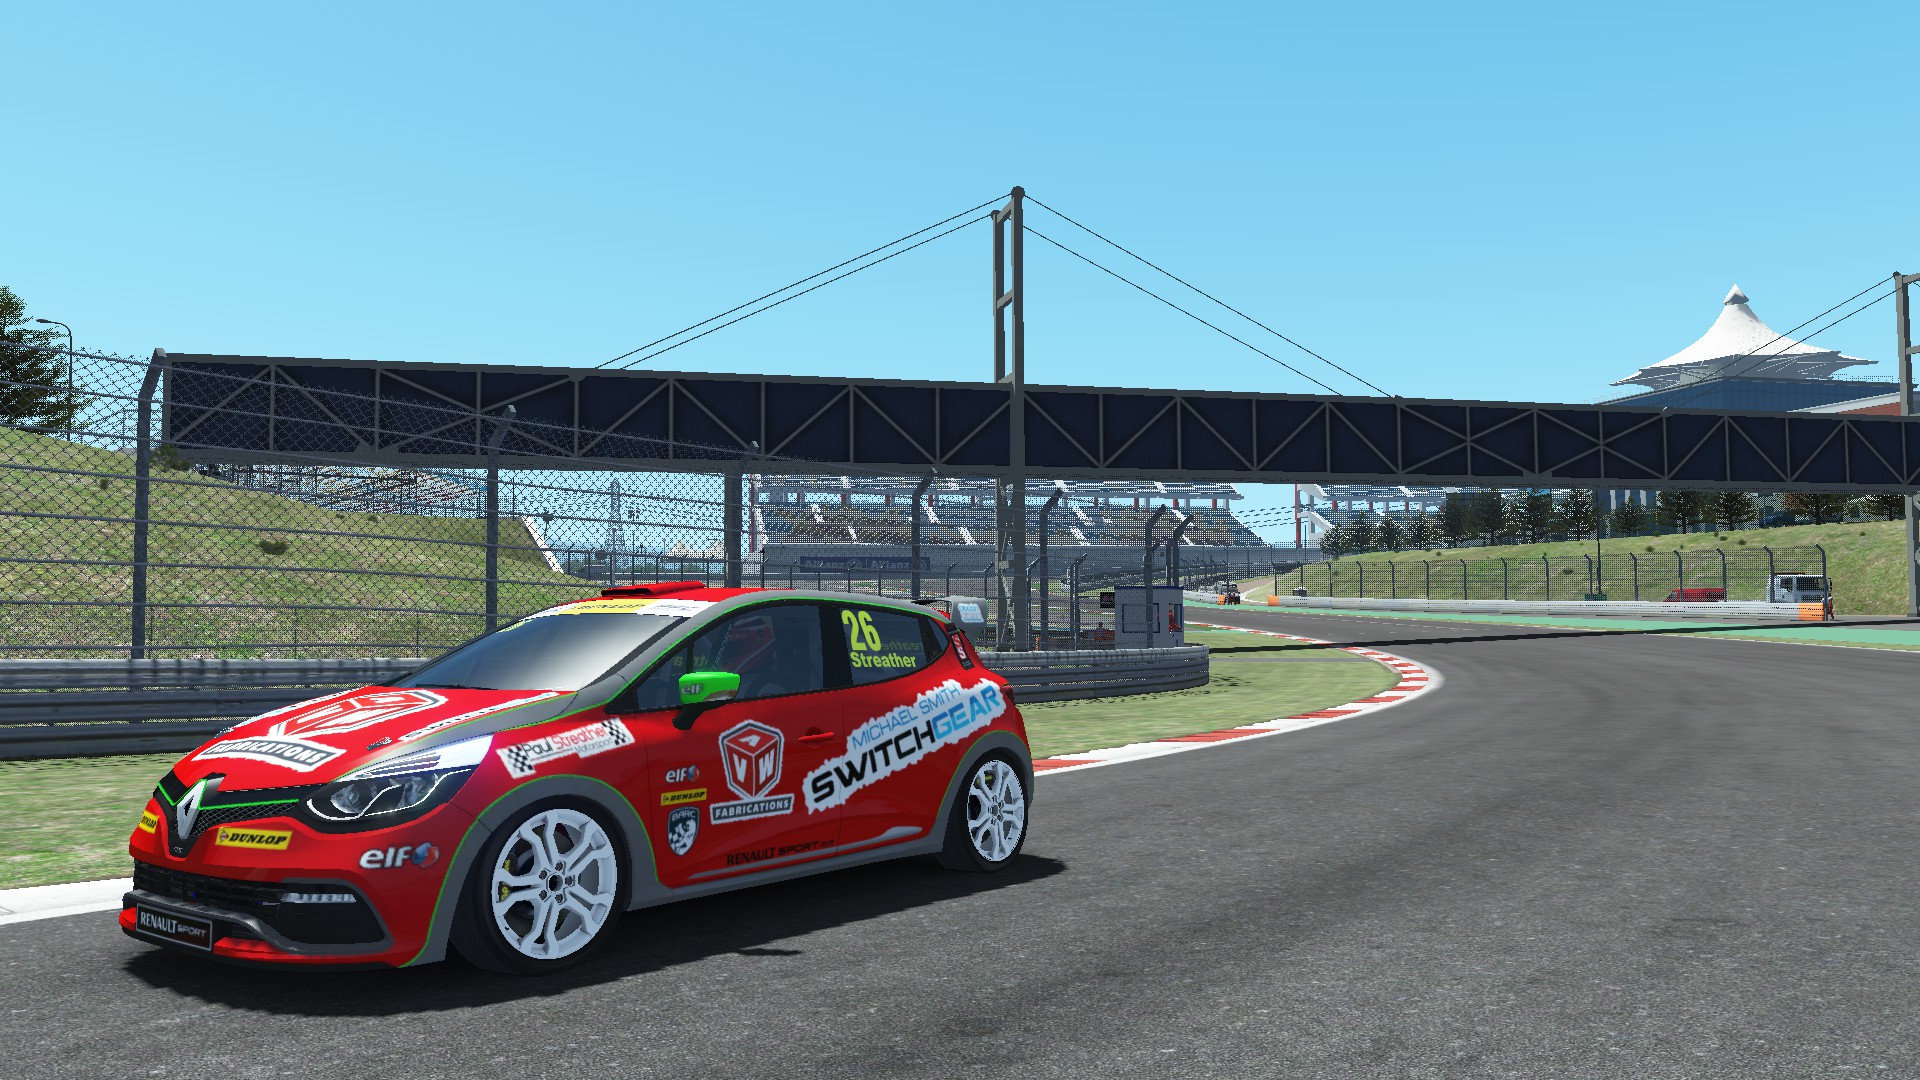 rfactor 2 install track from steam workshop